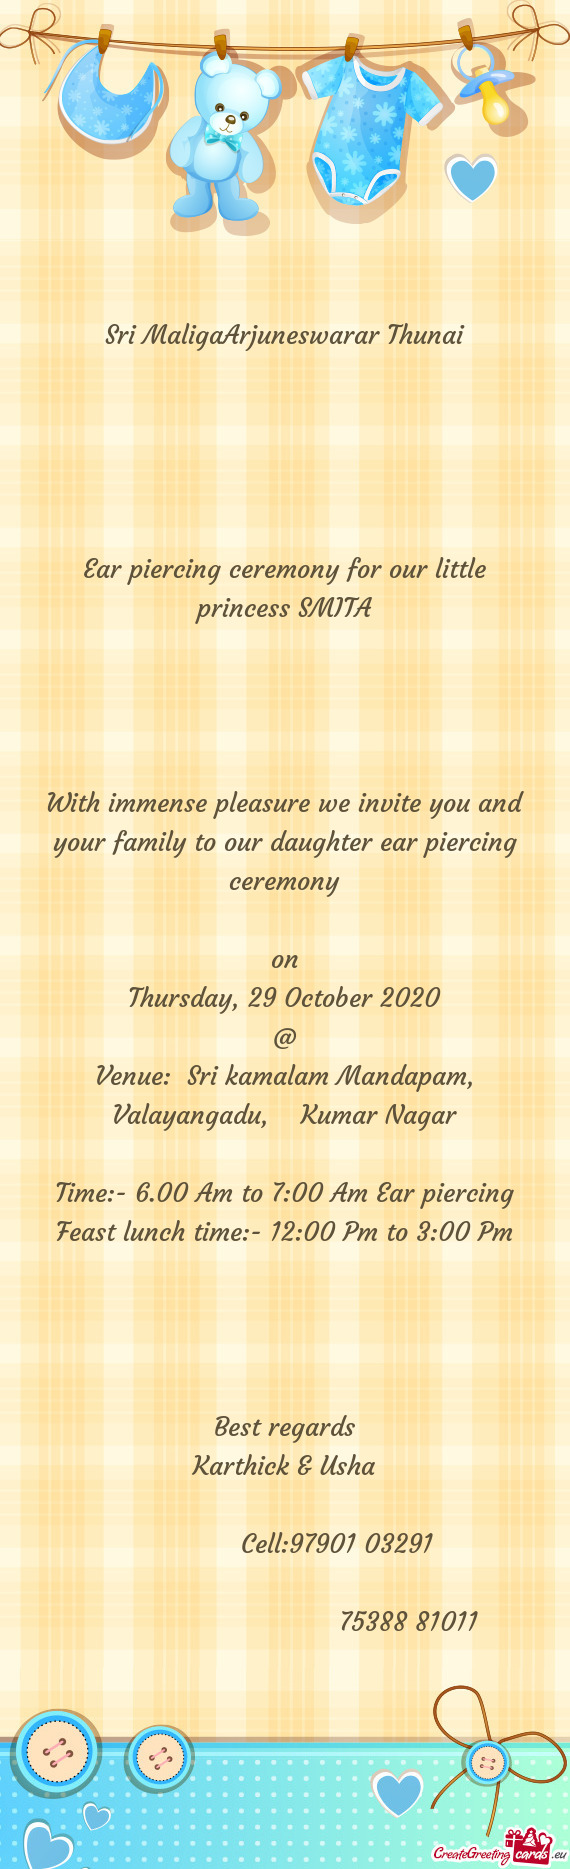 With immense pleasure we invite you and your family to our daughter ear piercing ceremony